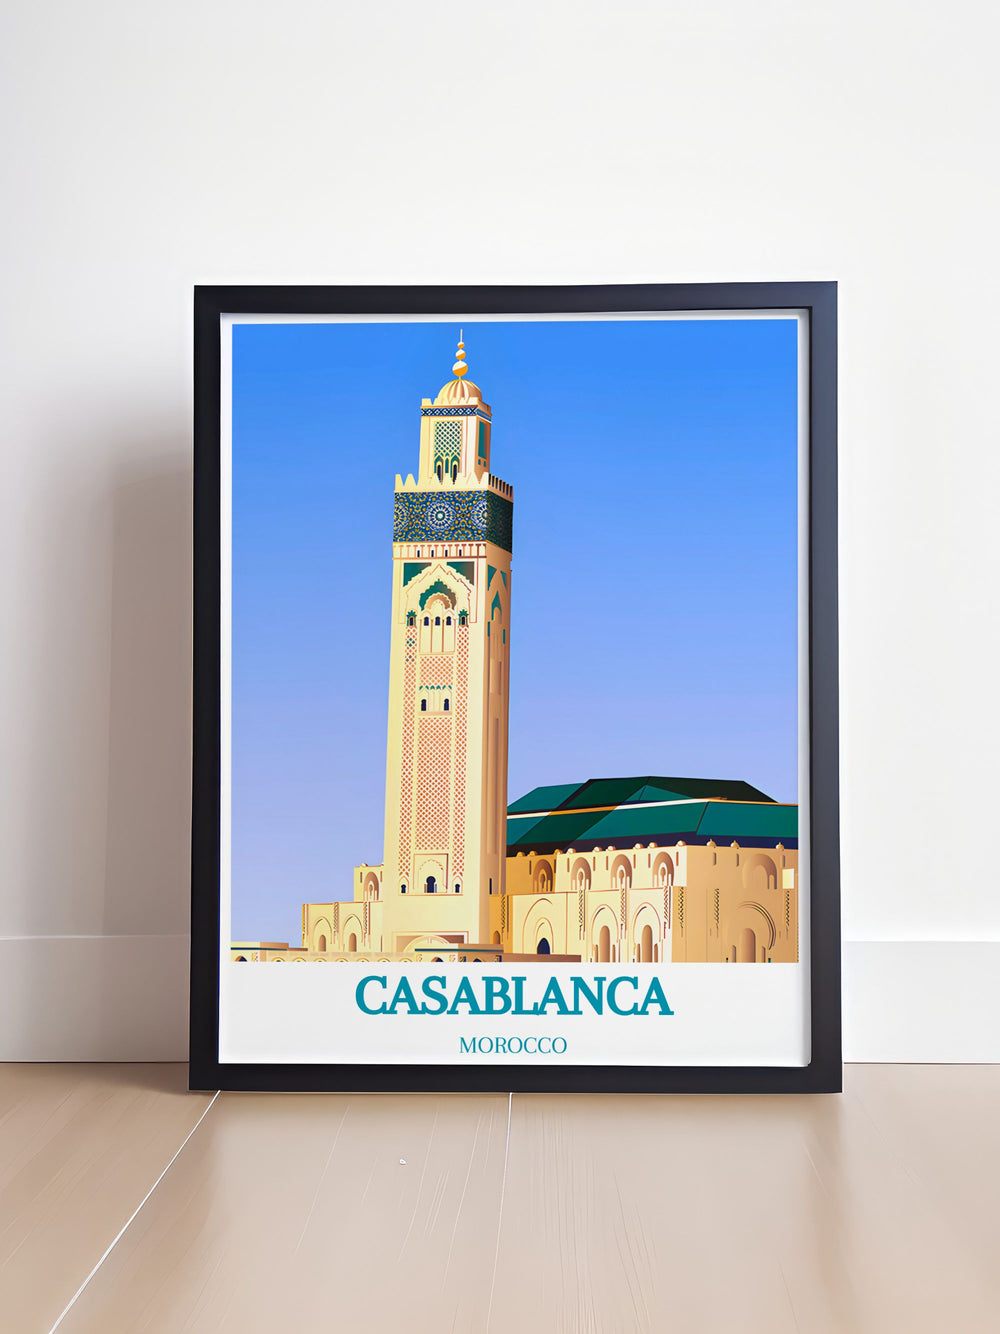 Majestic view of Casablanca’s Hassan II Mosque in a high-quality print, perfect for admirers of religious architecture and Moroccan art.